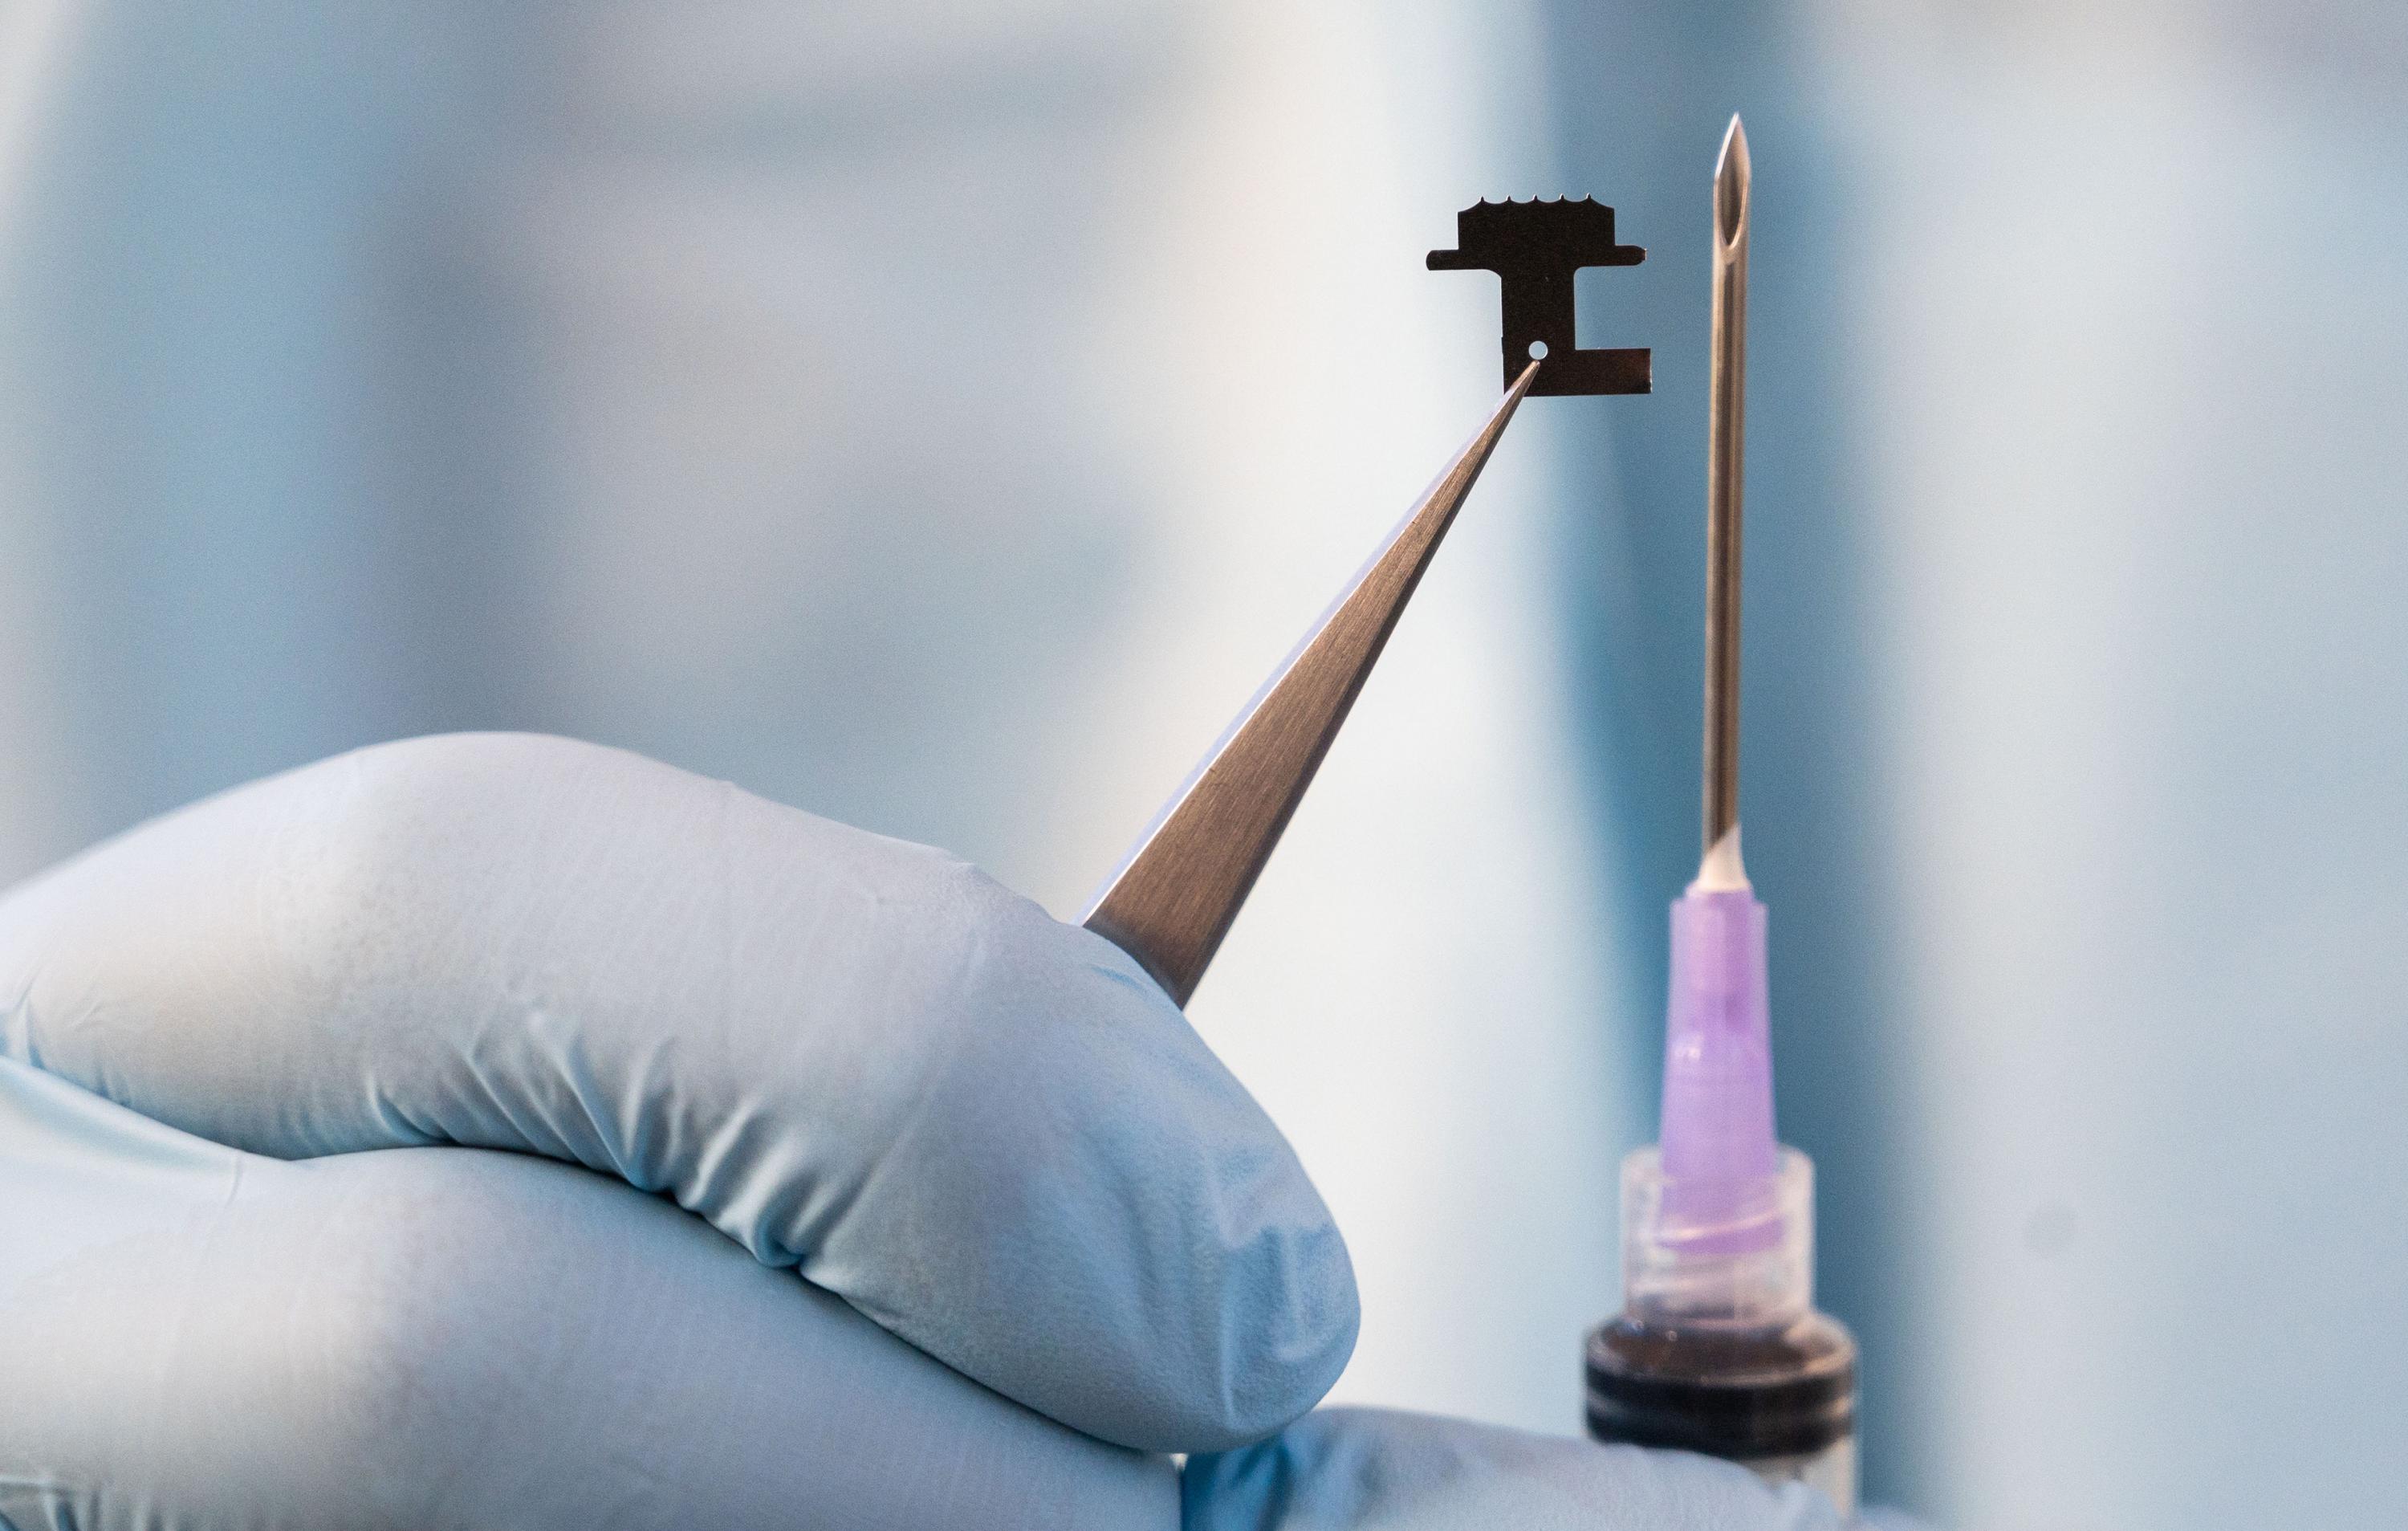 Size comparison of a microneedle patch used to extract interstitial fluid versus a hypodermic needle used to obtain blood samples. (Credit: Allison Carter, Georgia Tech)